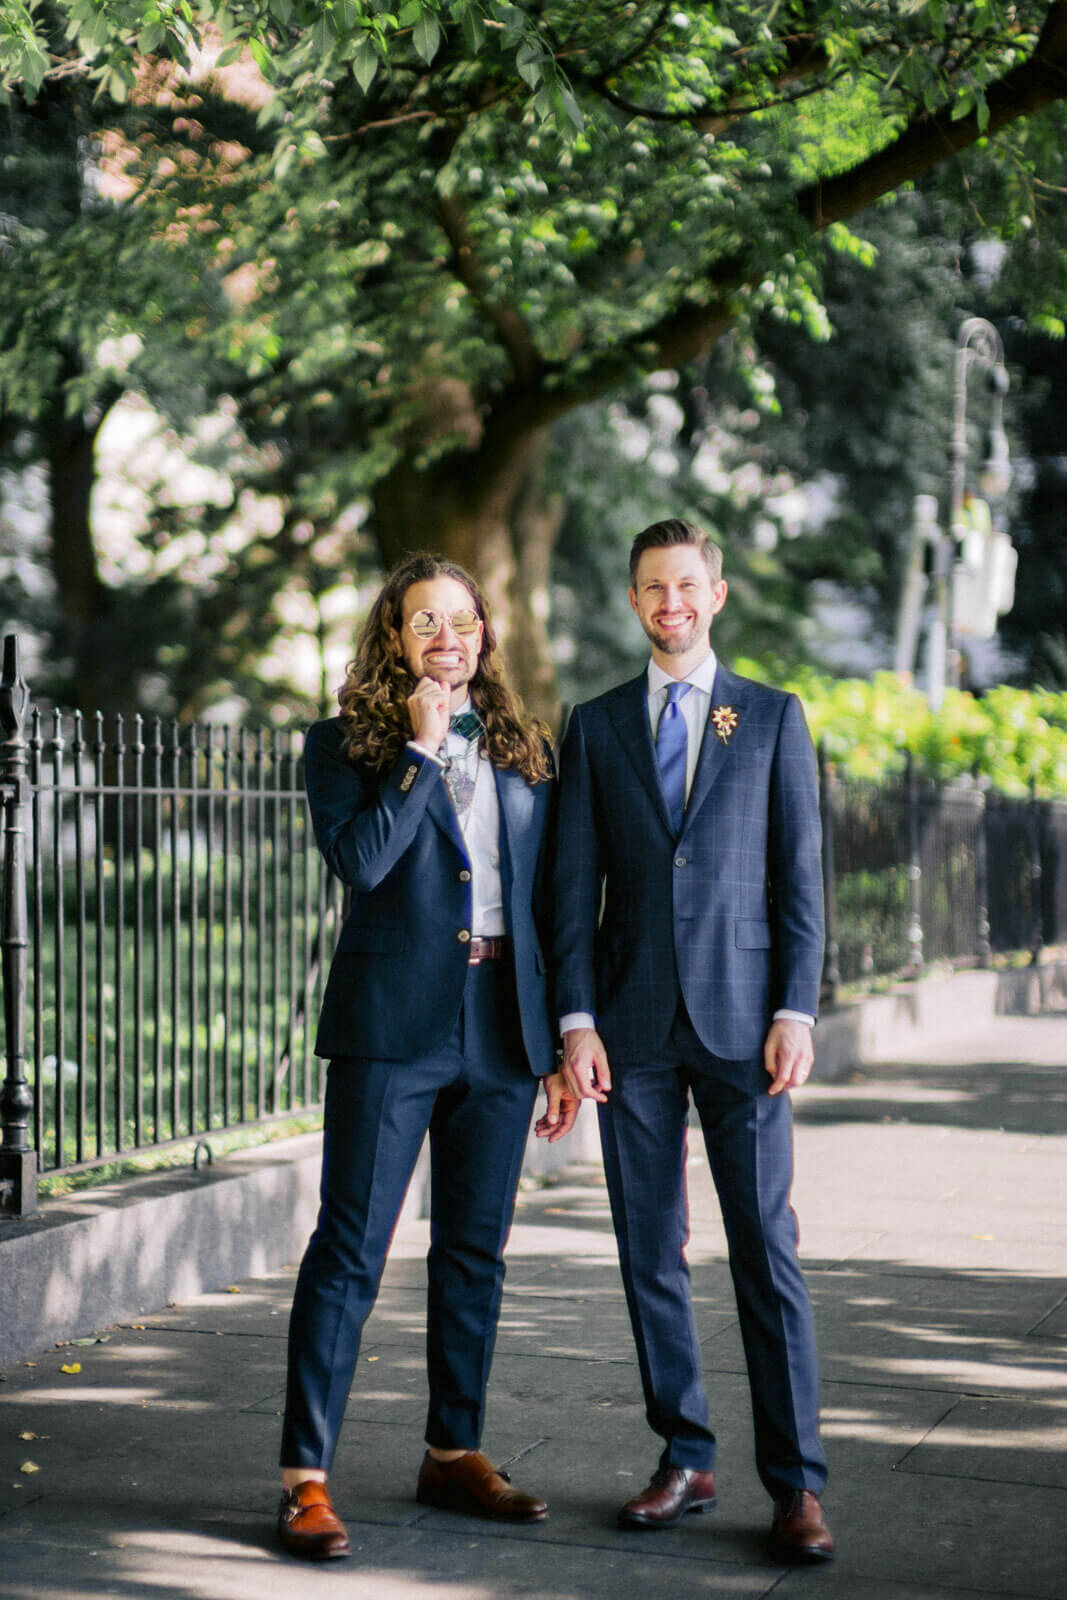 The two grooms are in a park, with trees in the background. NYC City Hall Elopement Image by Jenny Fu Studio